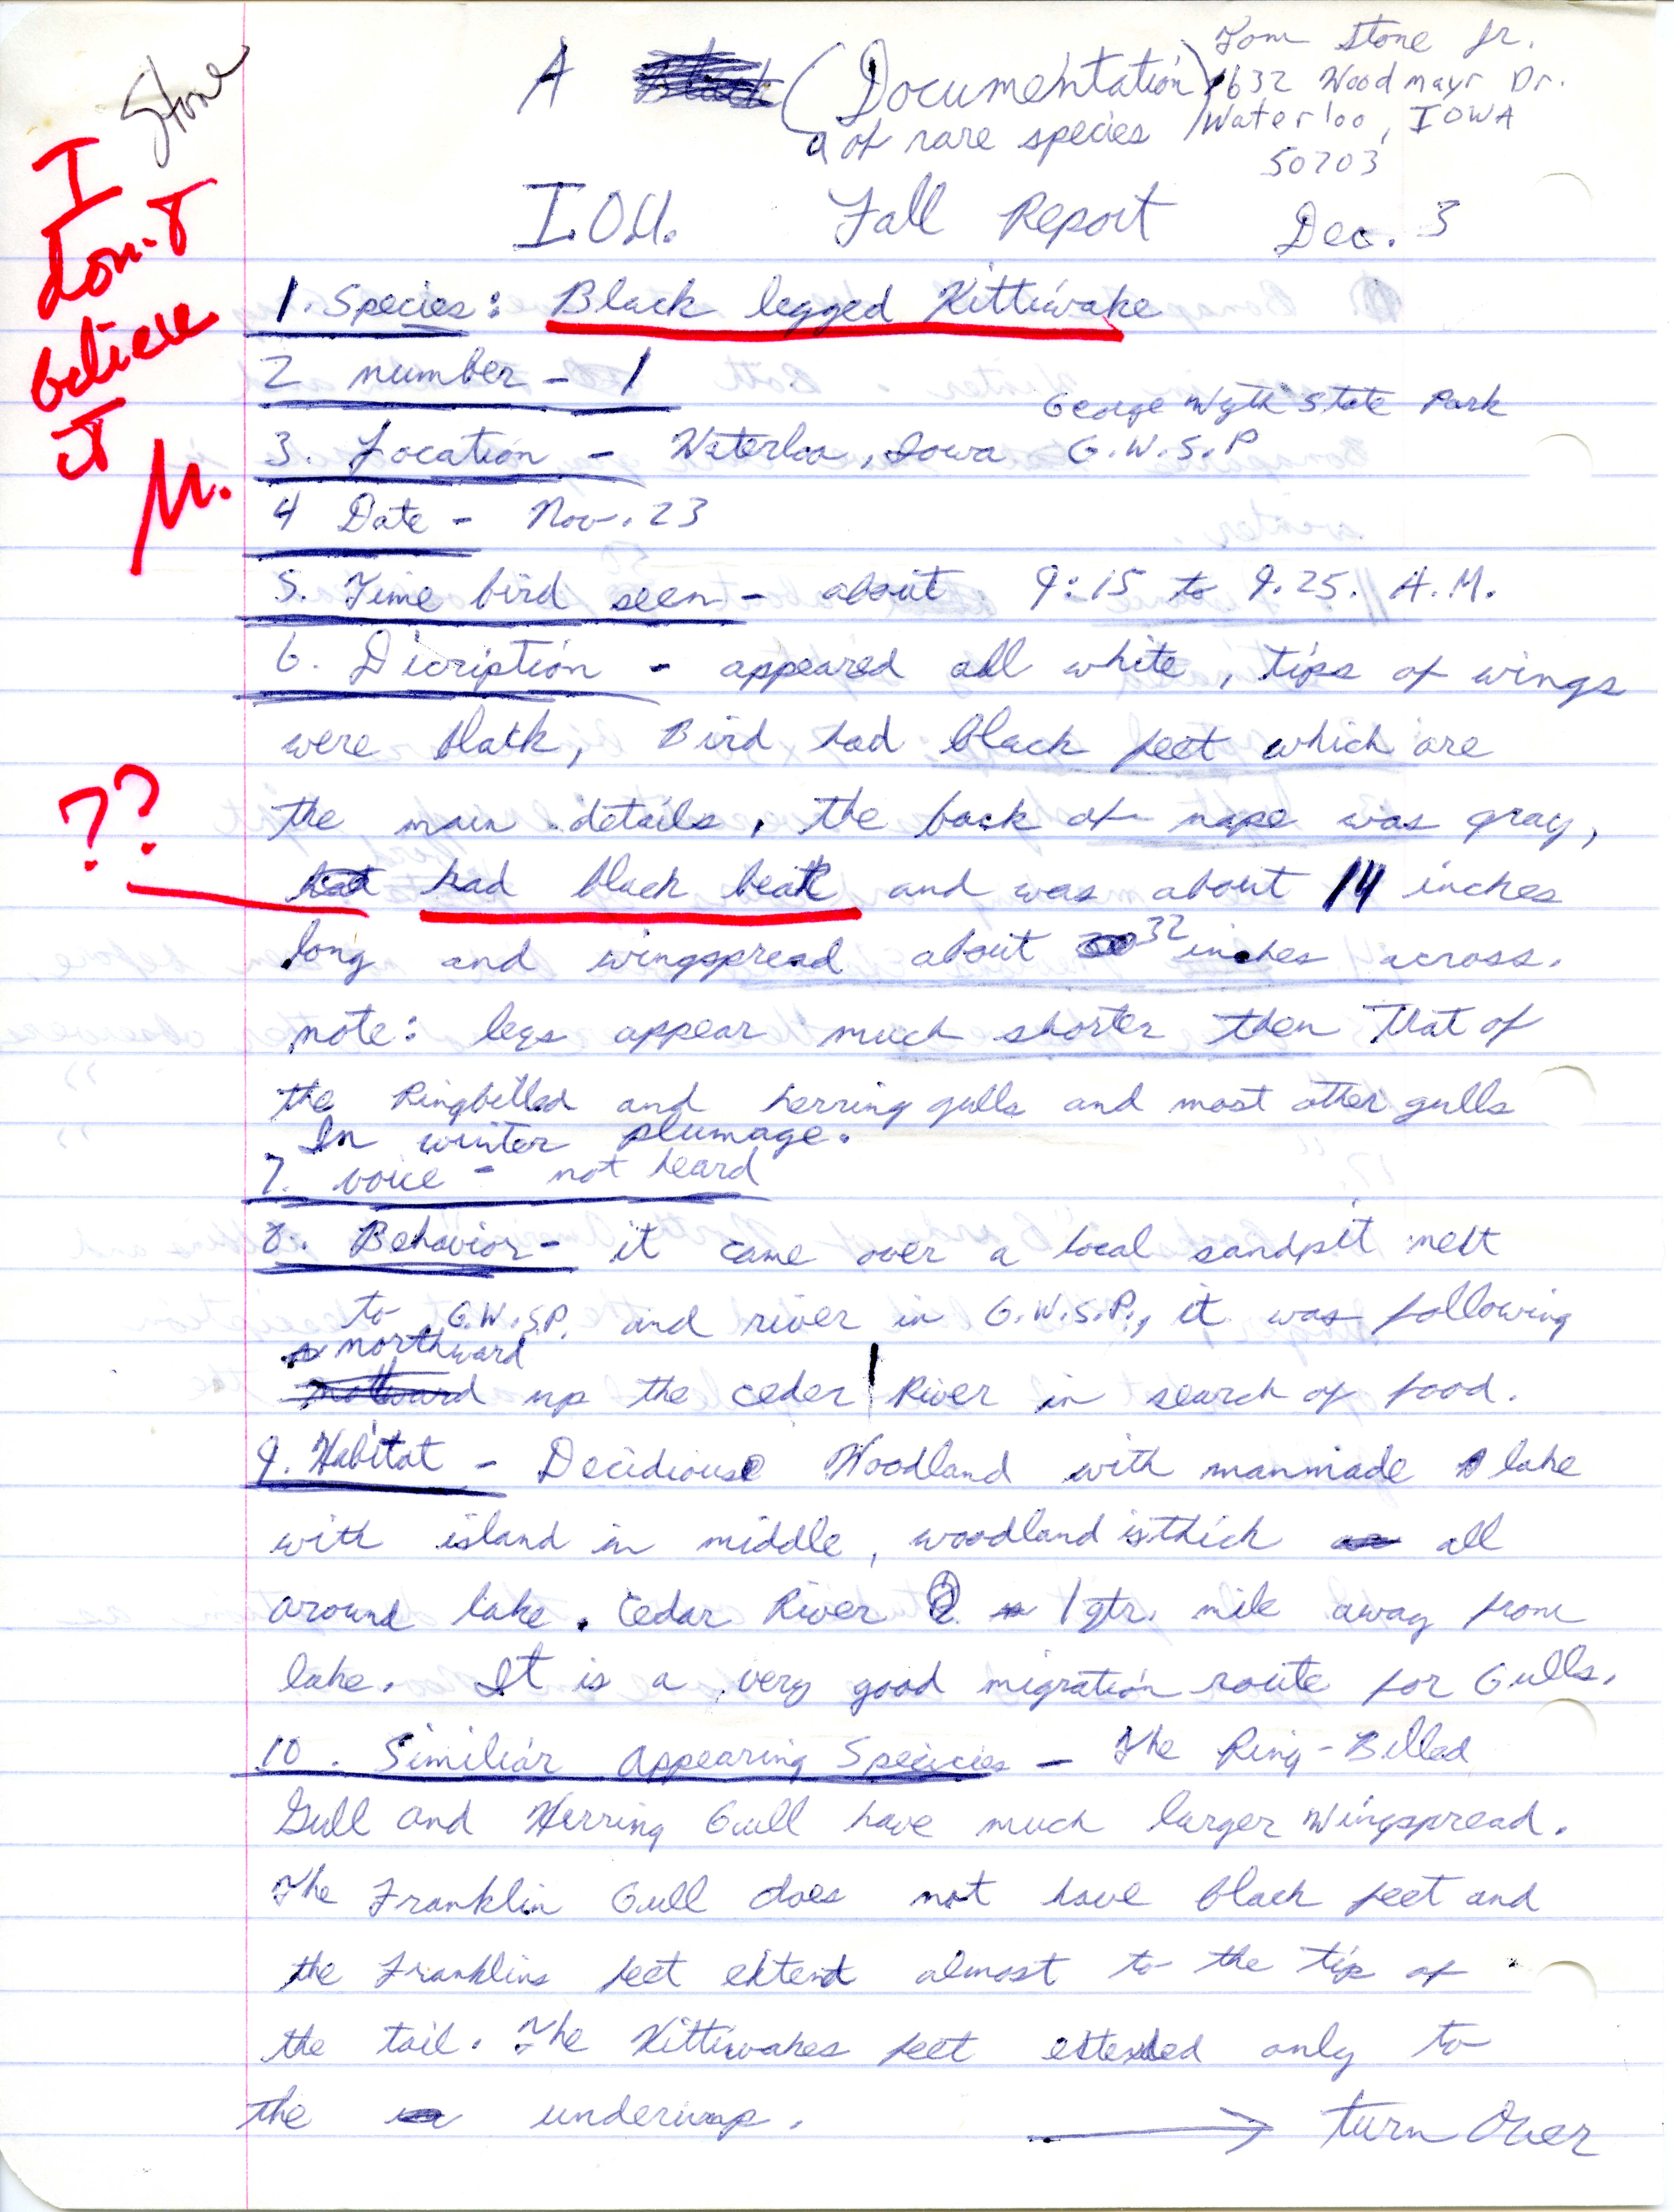 A documentation of rare species, and Iowa Ornithologists Union fall field notes, 1978